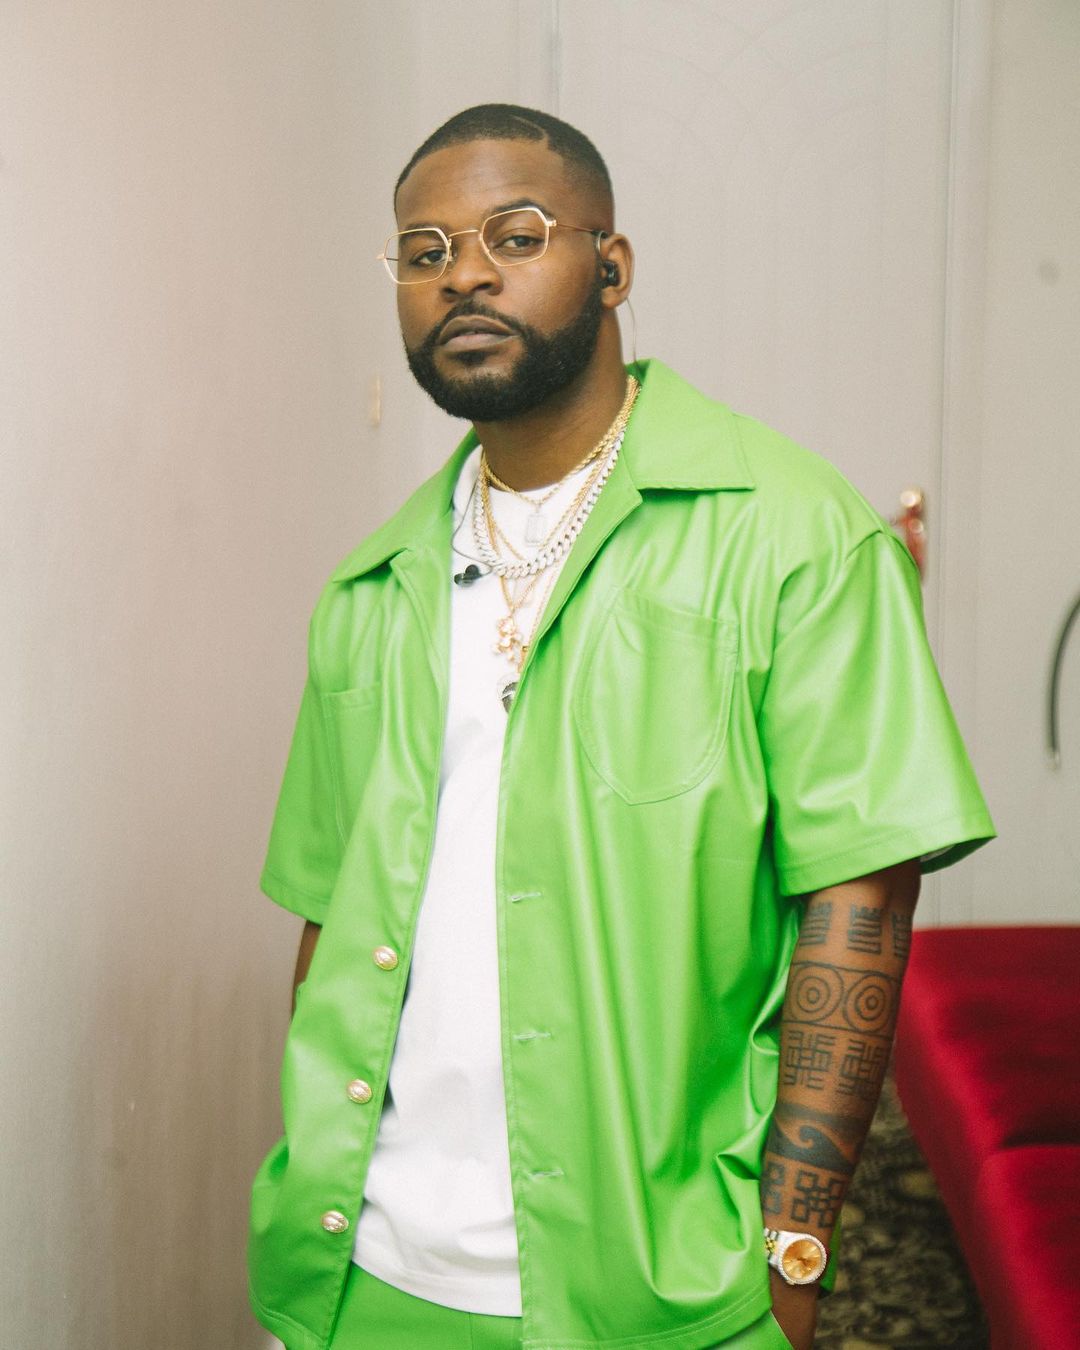 I Don't Want To Hear Excuses Of "My Vote Won't Count" – Falz Tells Fans